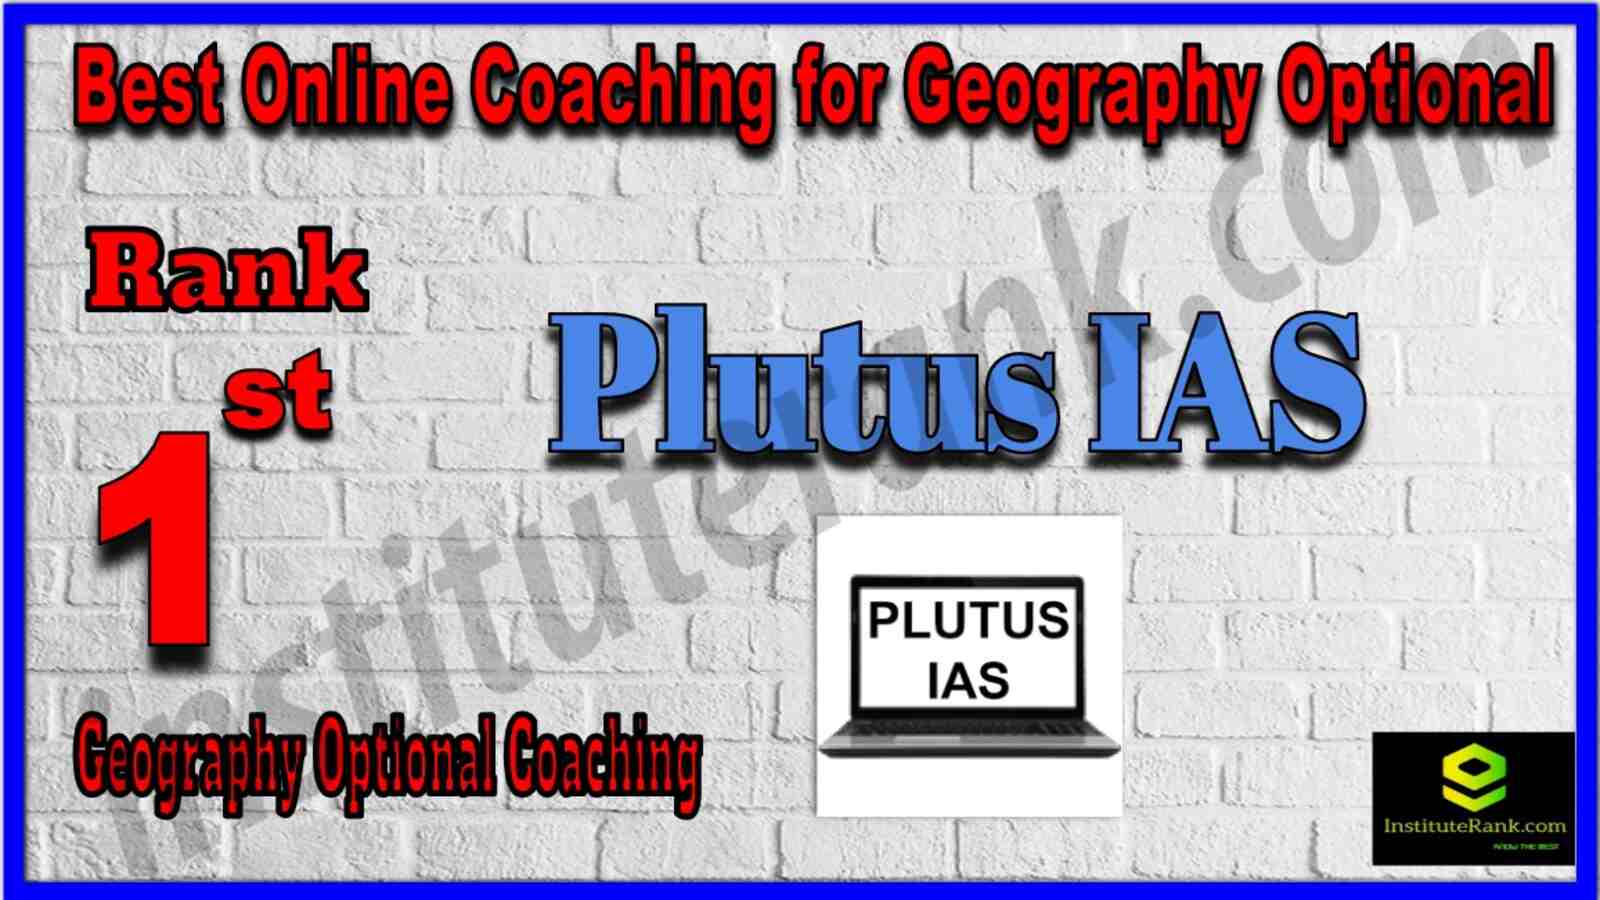 Rank 1 Best Online Coaching for Geography Optional